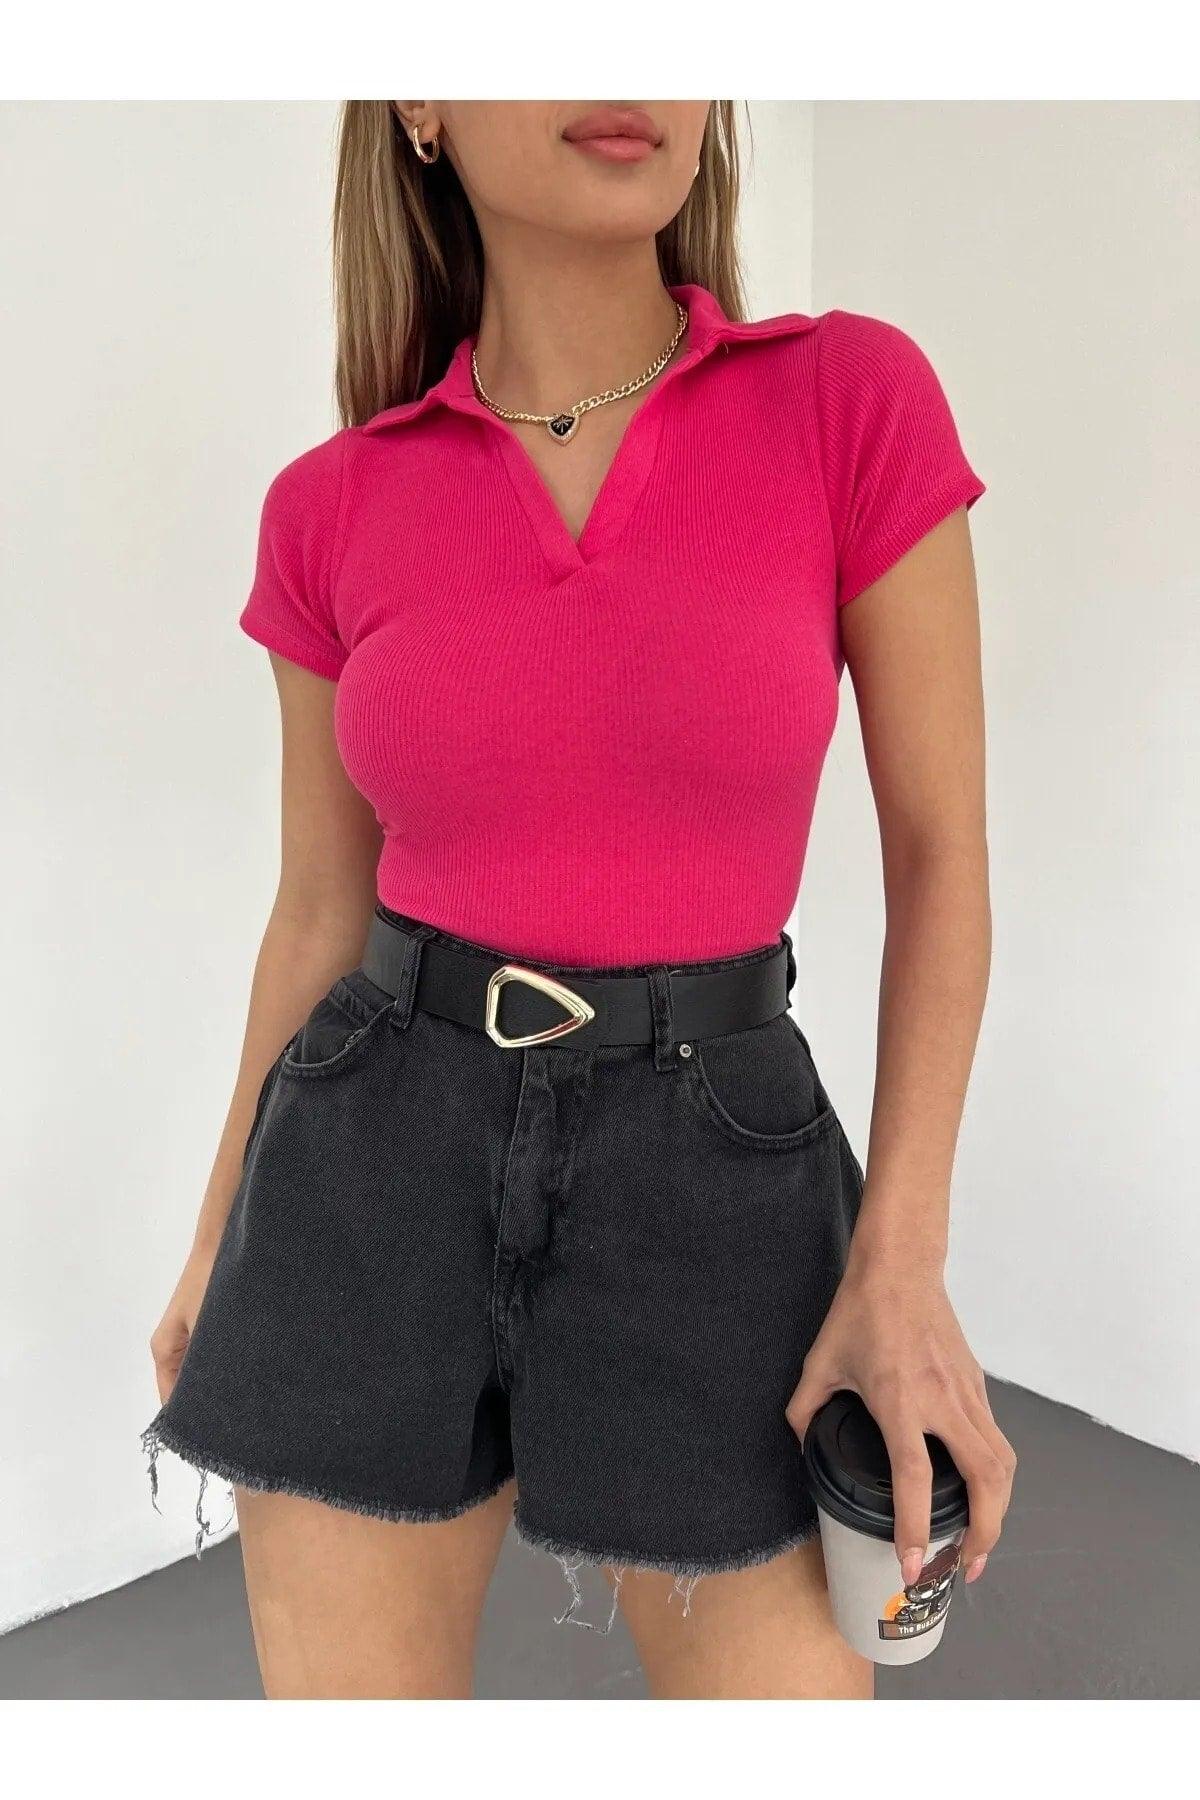 Fitted/Fitted Candy Pink Polo Neck Short Sleeve Camisole Crop Blouse - Swordslife